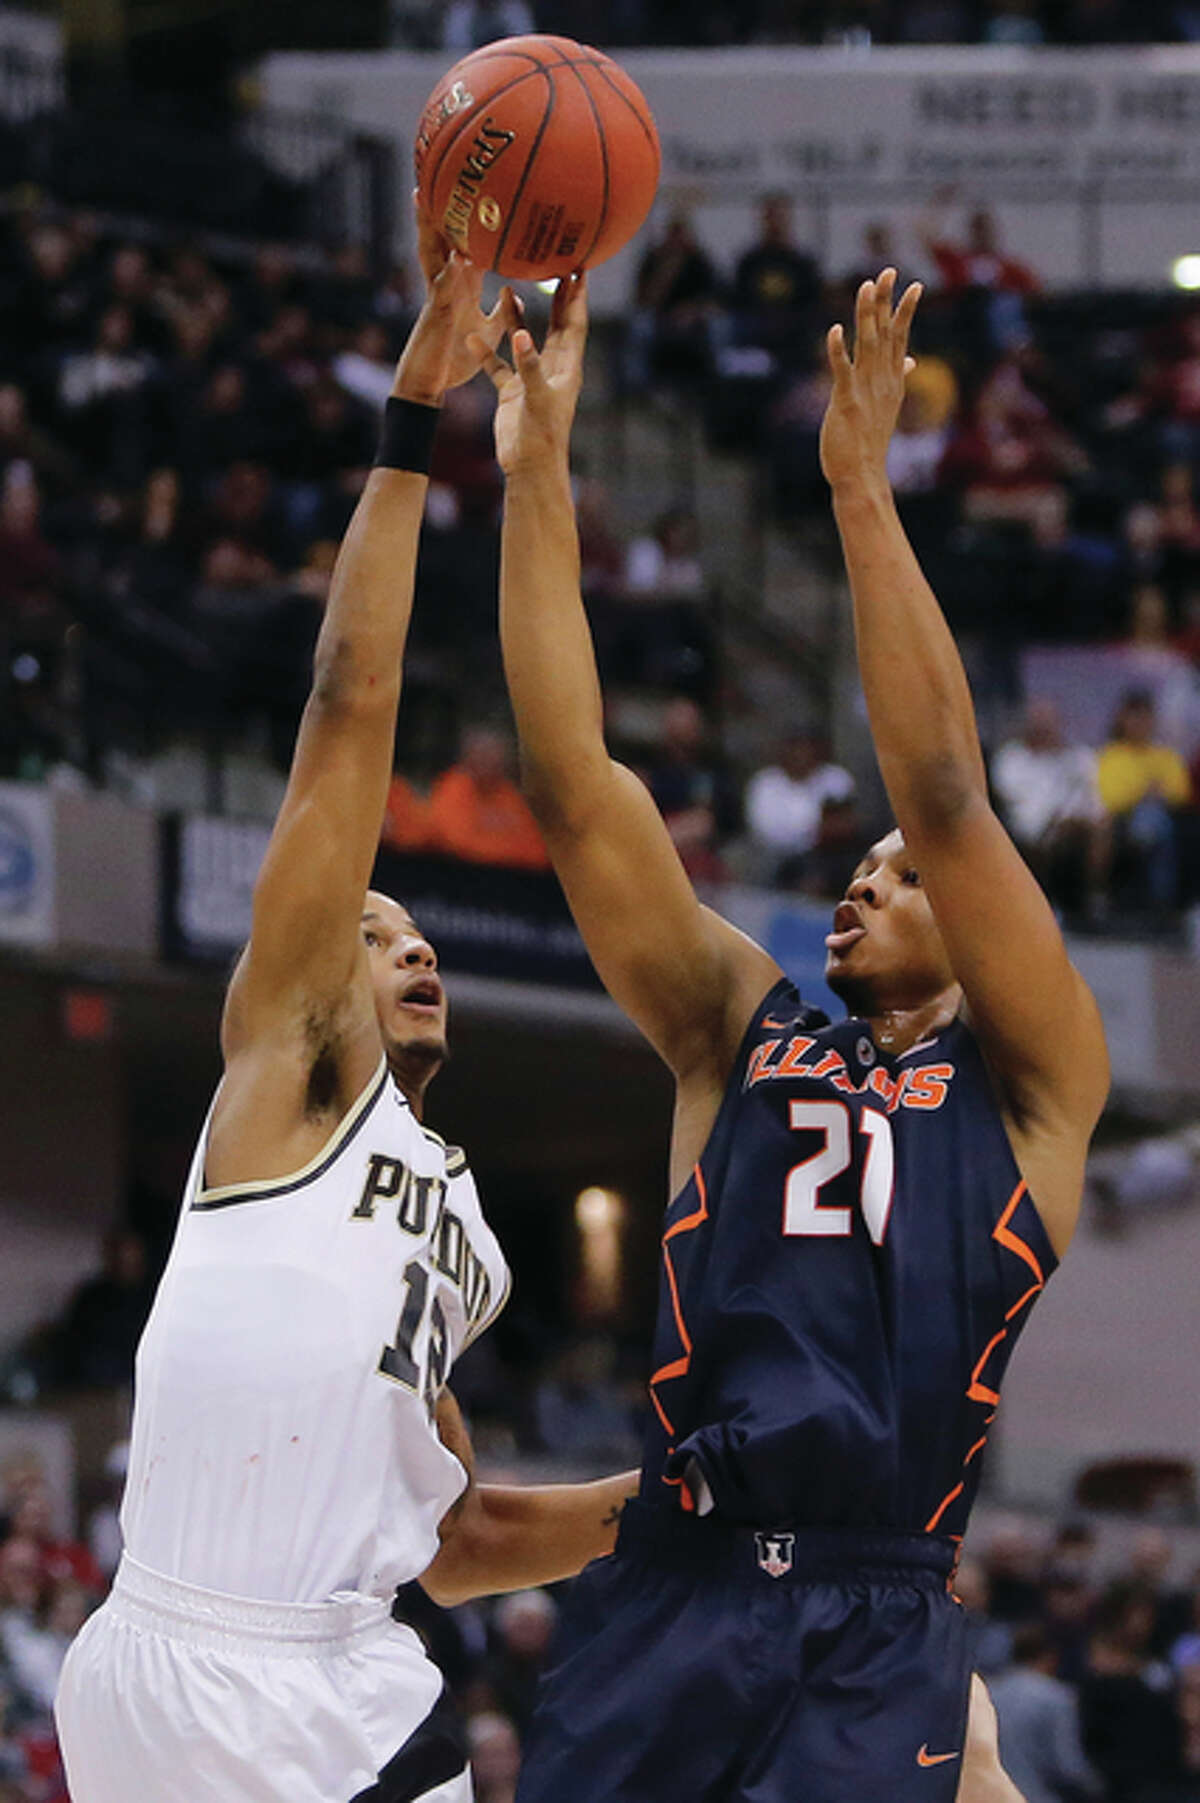 Purdue’s Vince Edwards (left) blocks a shot by Illinois’ Malcolm Hill on Friday in the quarterfinals at the Big Ten Conference tournament in Indianapolis.